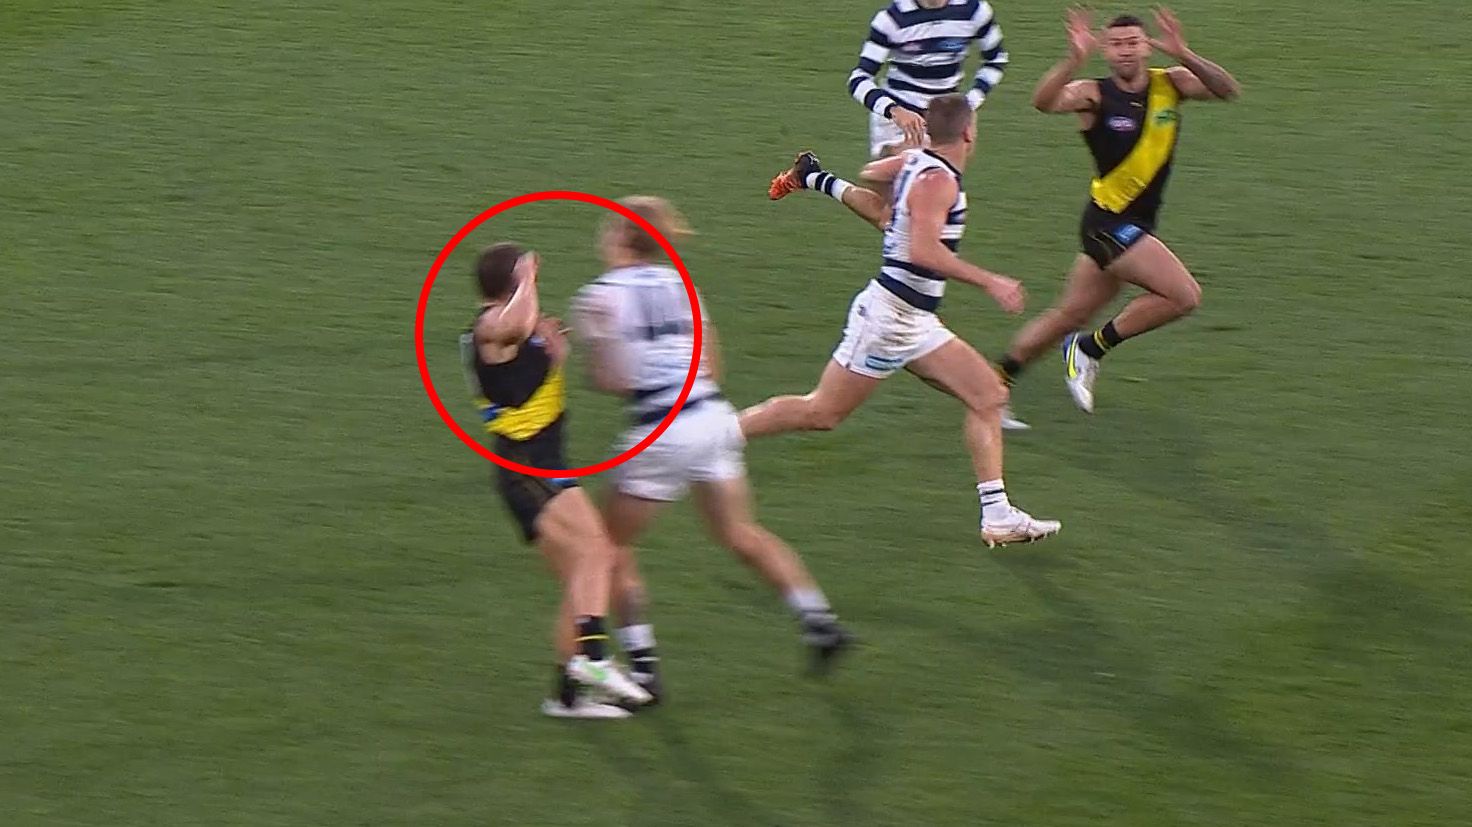 Cats defender facing weeks on sideline for vicious hit 